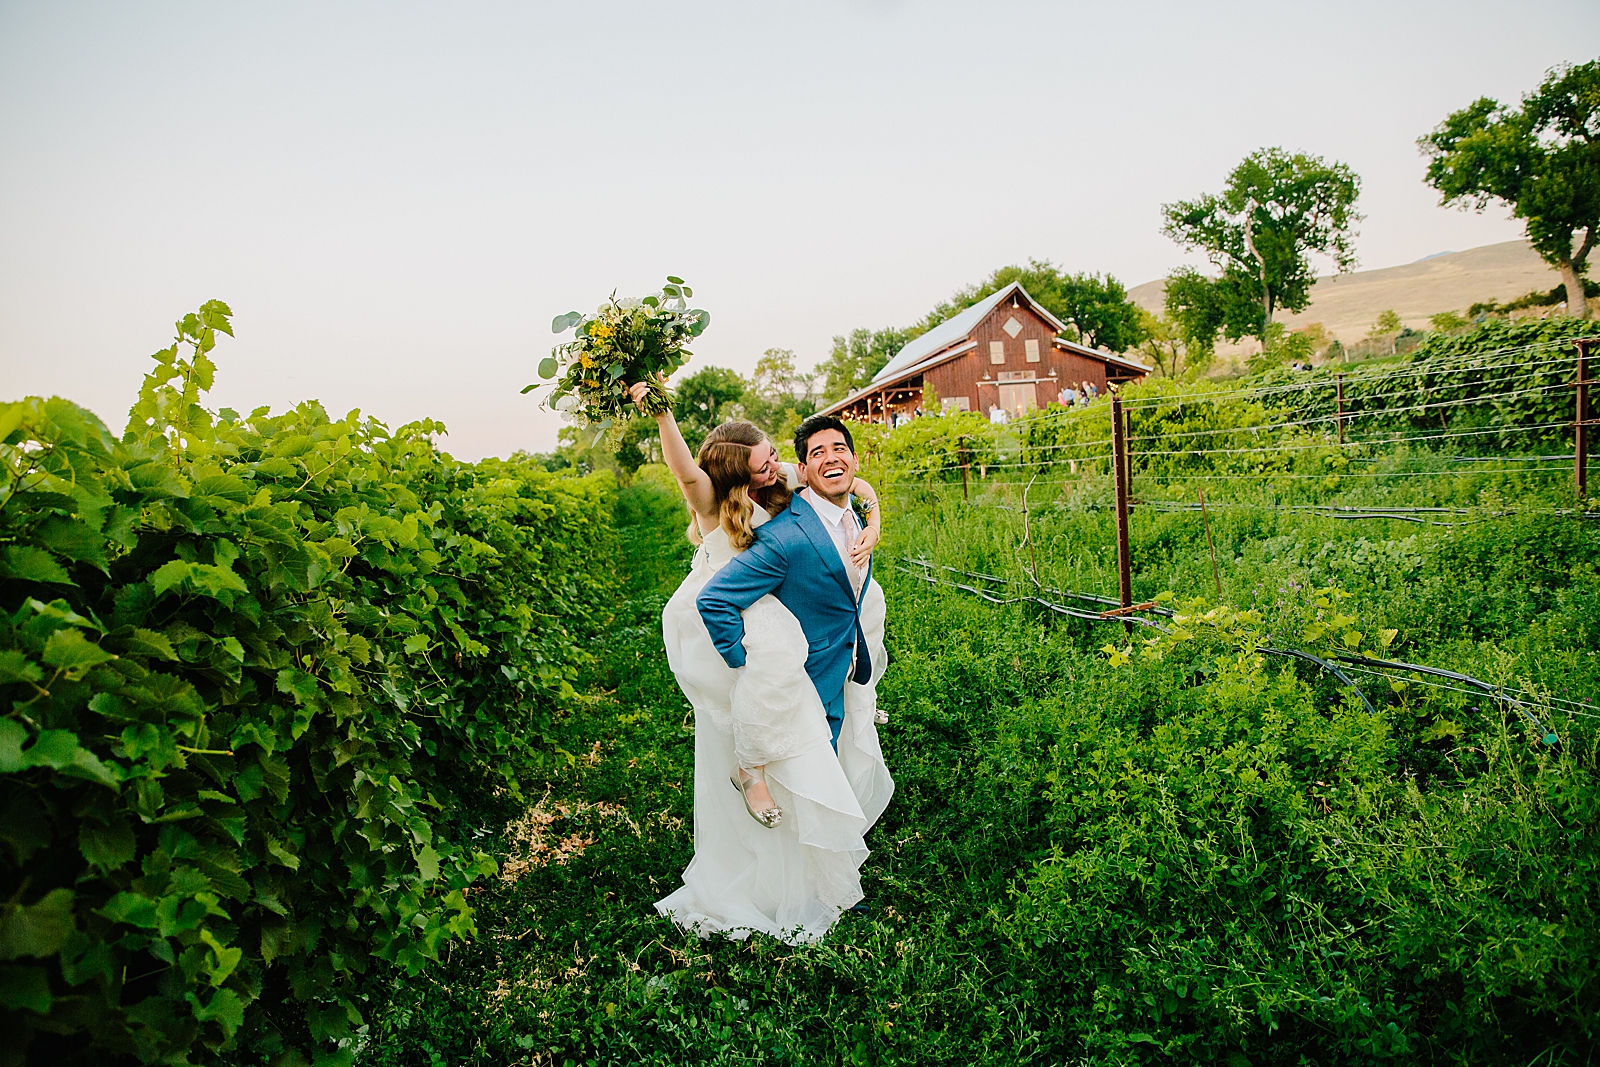 bride piggy backing on her groom as they are in a vineyard for their outdoor wedding in Pocatello